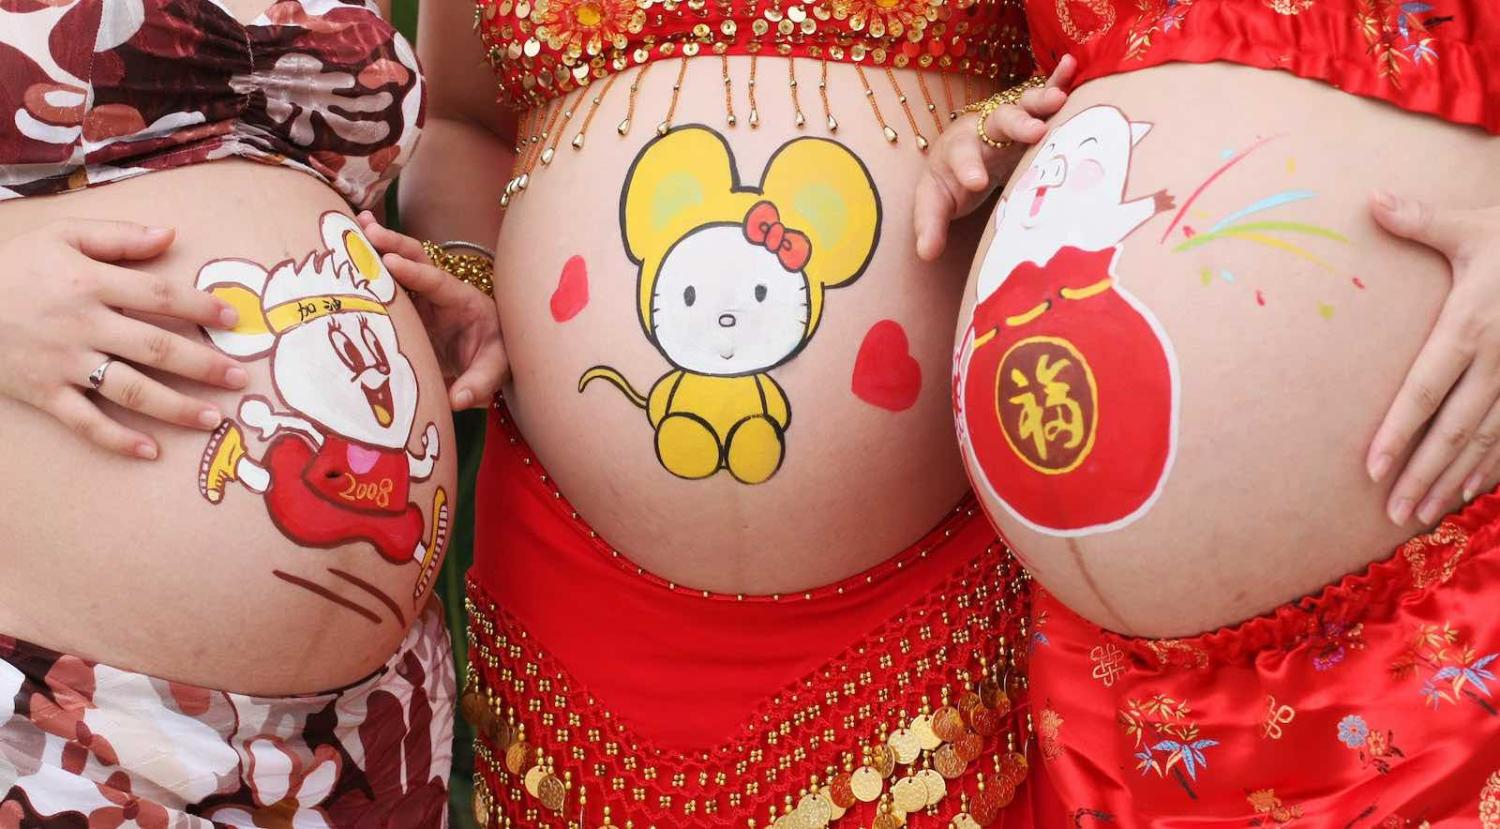 Mothers-to-be at a body-painting competition for pregnant women in Haikou, China (Photo: Zhang Mao via Getty)